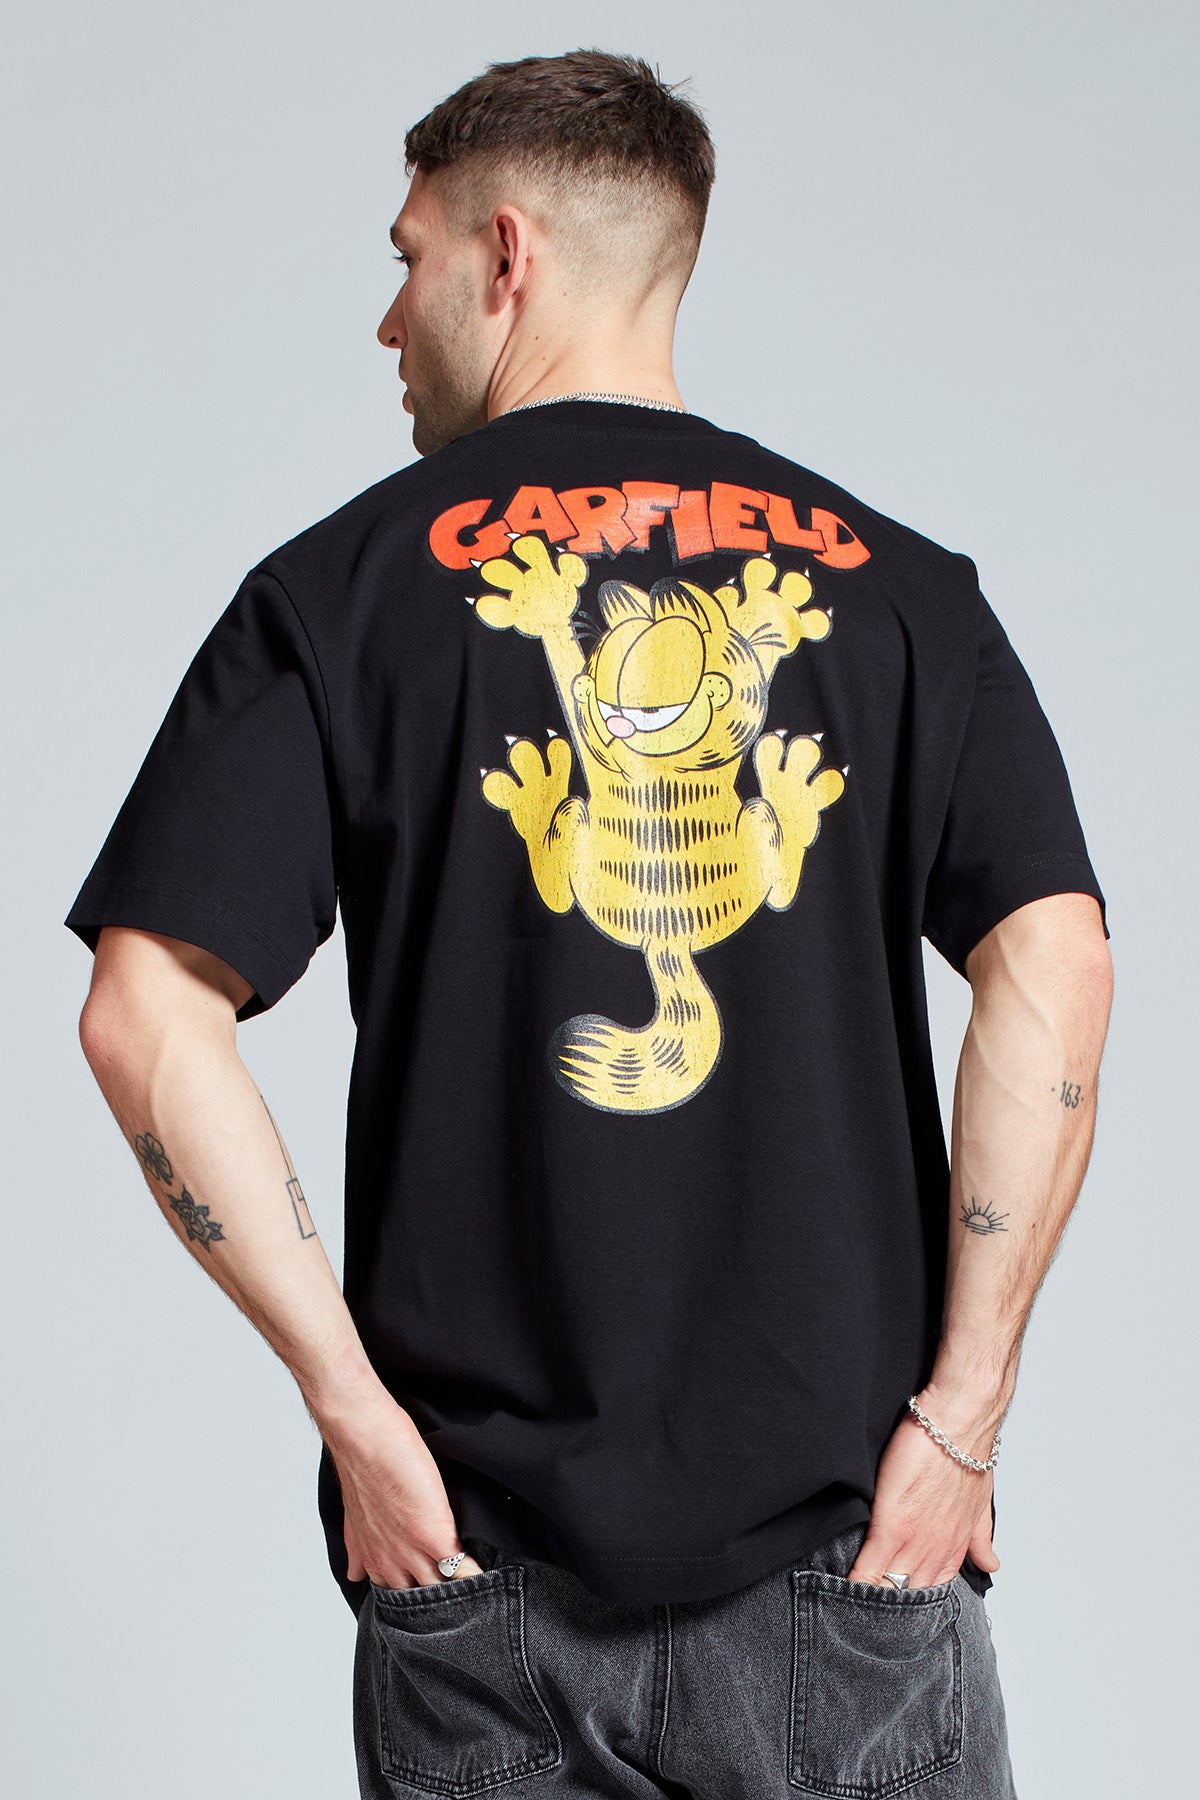 Garfield Watch Your Back T-shirt in Black